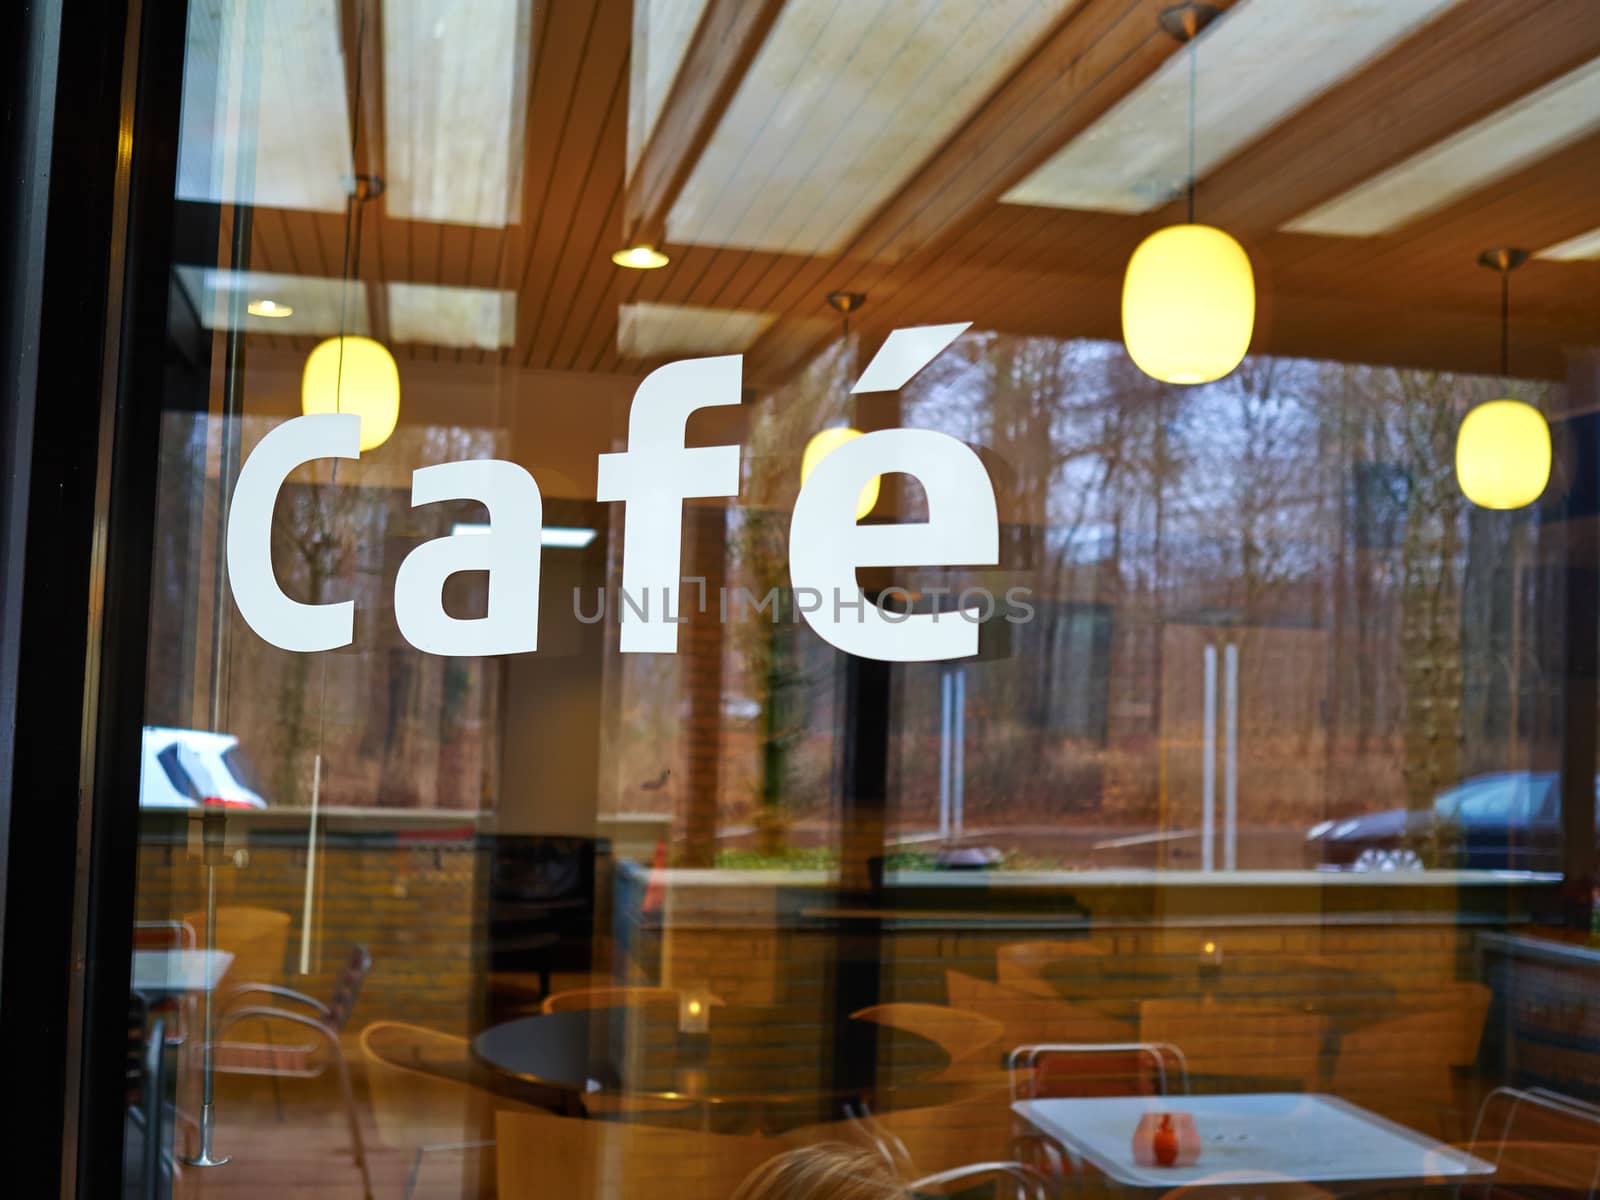 Modern Classical Design Coffee Shop Cafe Restaurant Sign on Glass Window 